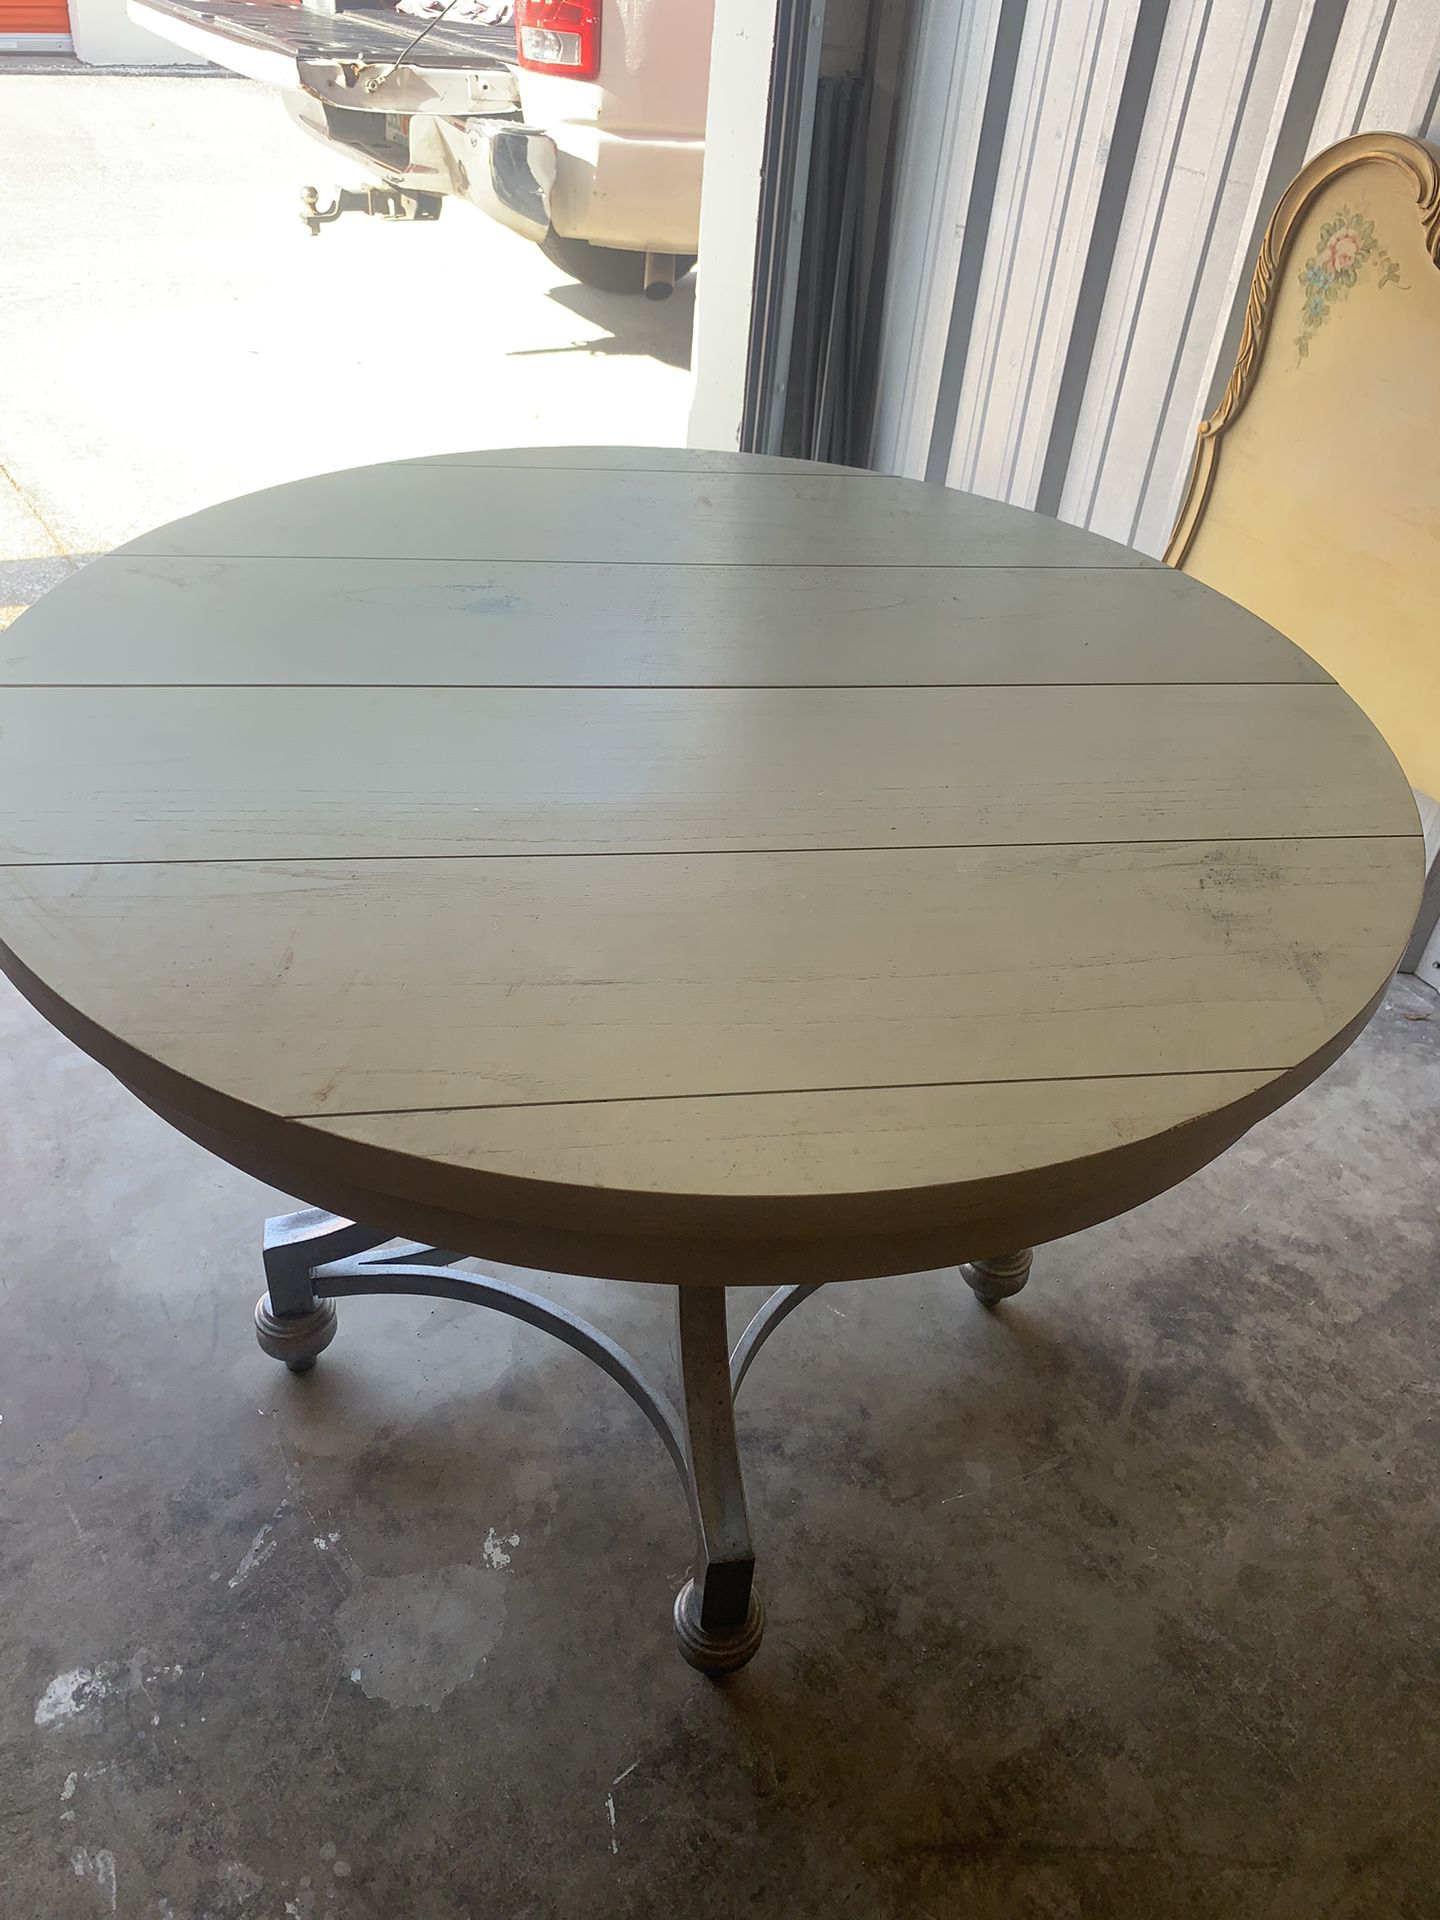 Dining Room Table With Lever Included